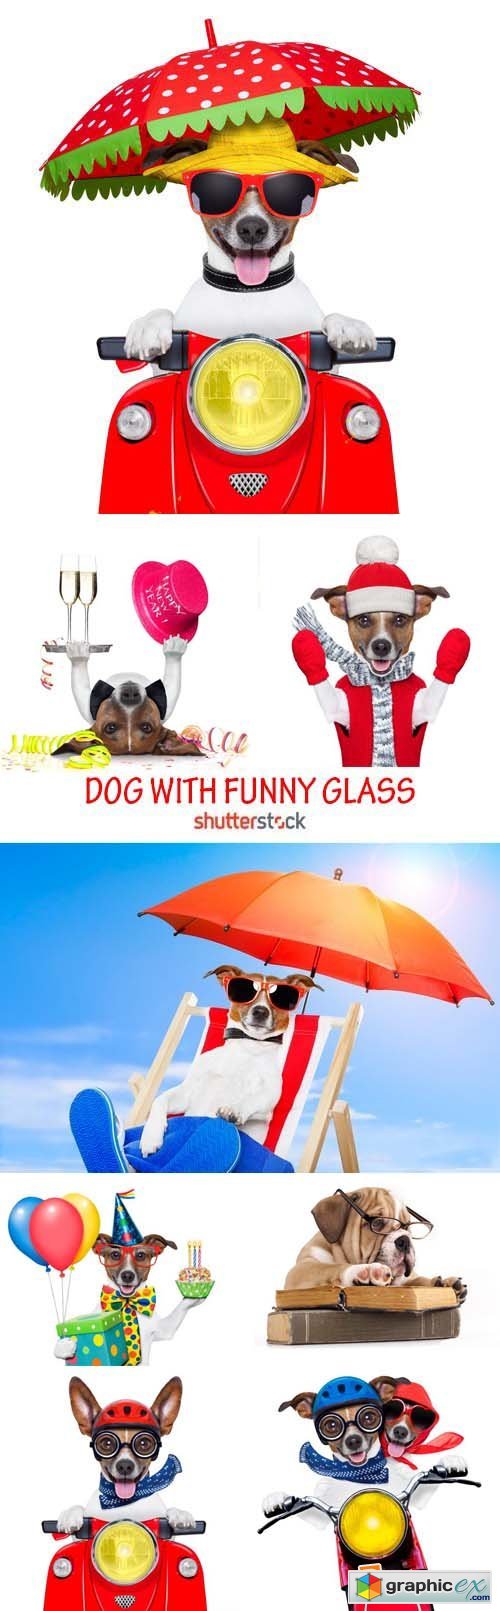 Amazing SS - Dog with funny glasses, 25xJPG